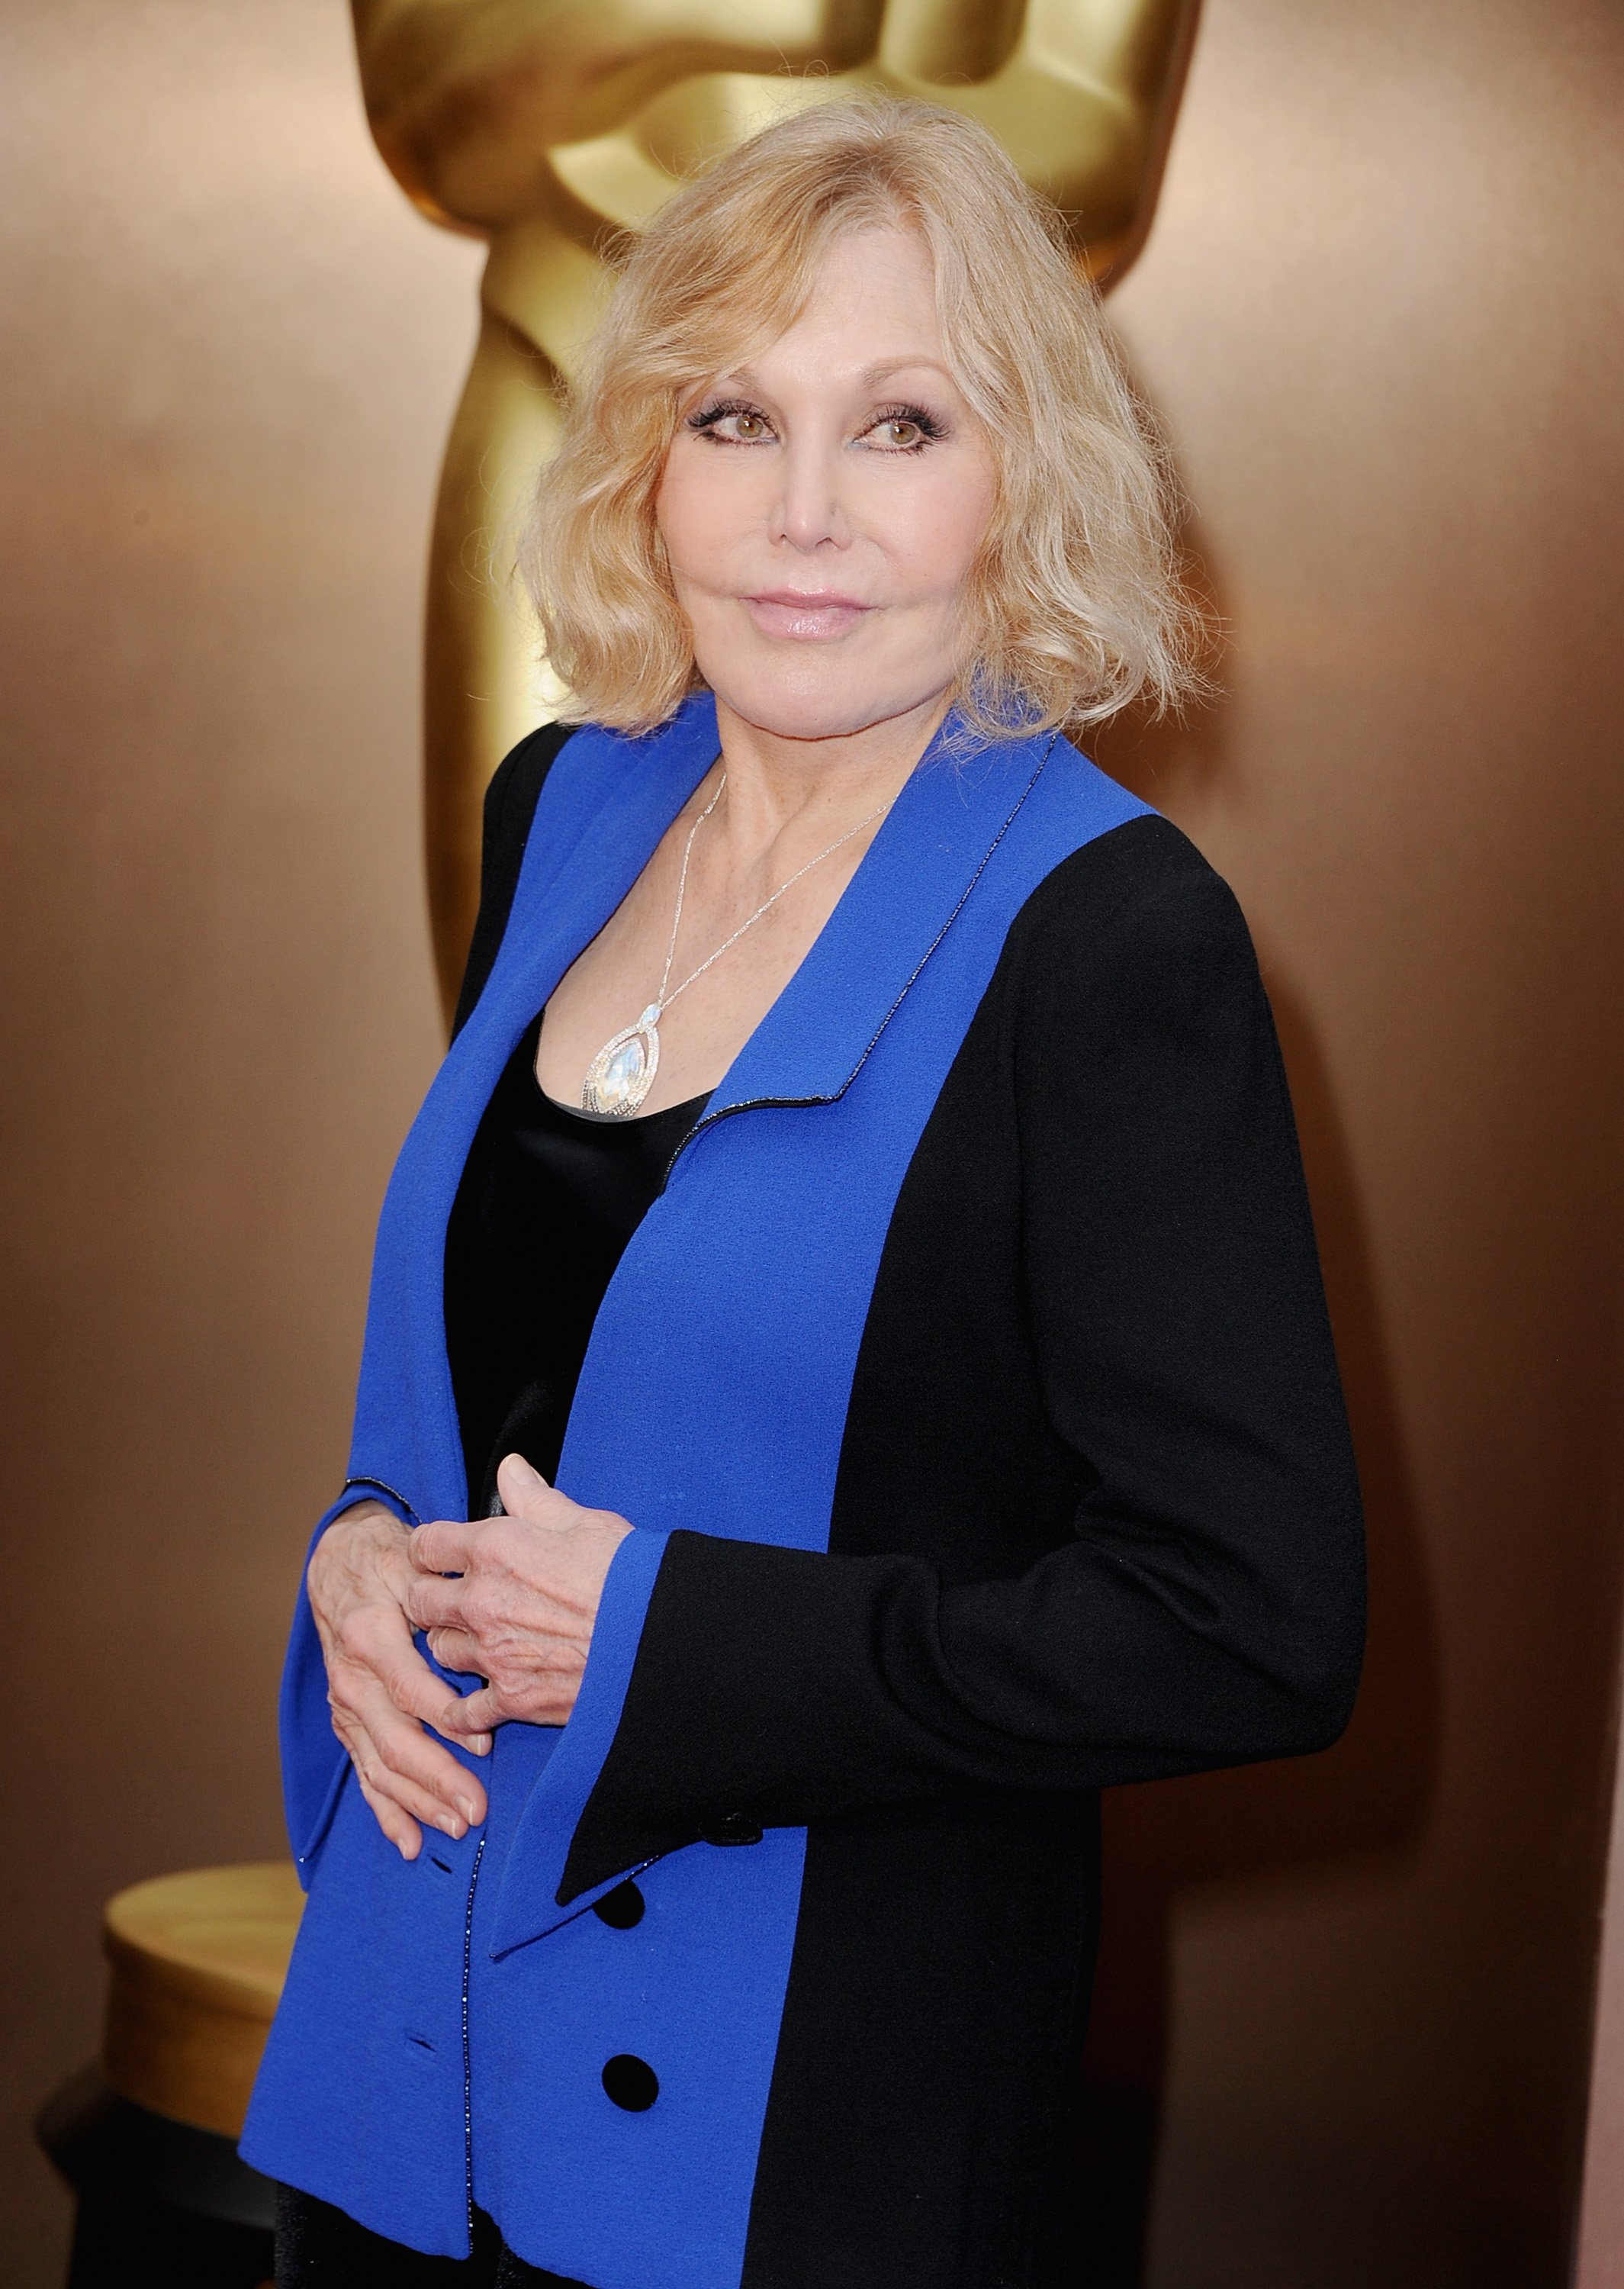 Kim Novak attends the Oscars at Hollywood & Highland Center on March 2, 2014 in Hollywood, California.| Photo: Getty Images